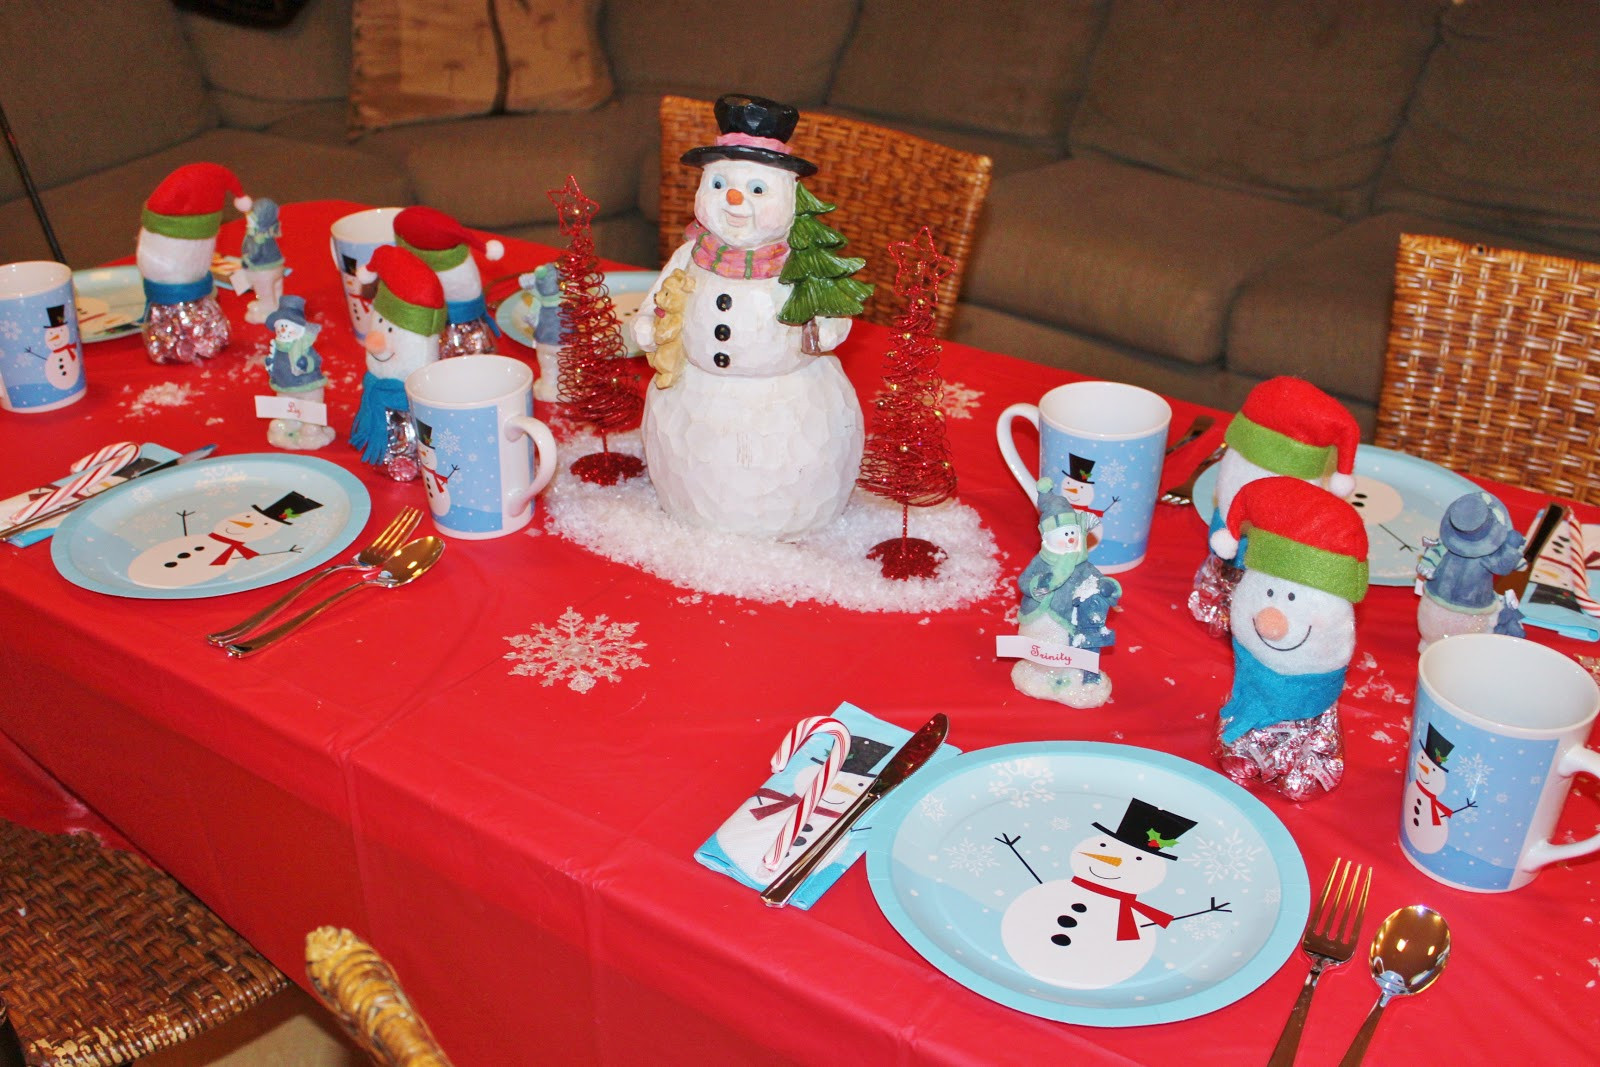 Girl Scout Christmas Party Ideas
 HUNTINGTON BEACH GIRL SCOUT TROOP 746 SNOWMAN CHRISTMAS PARTY